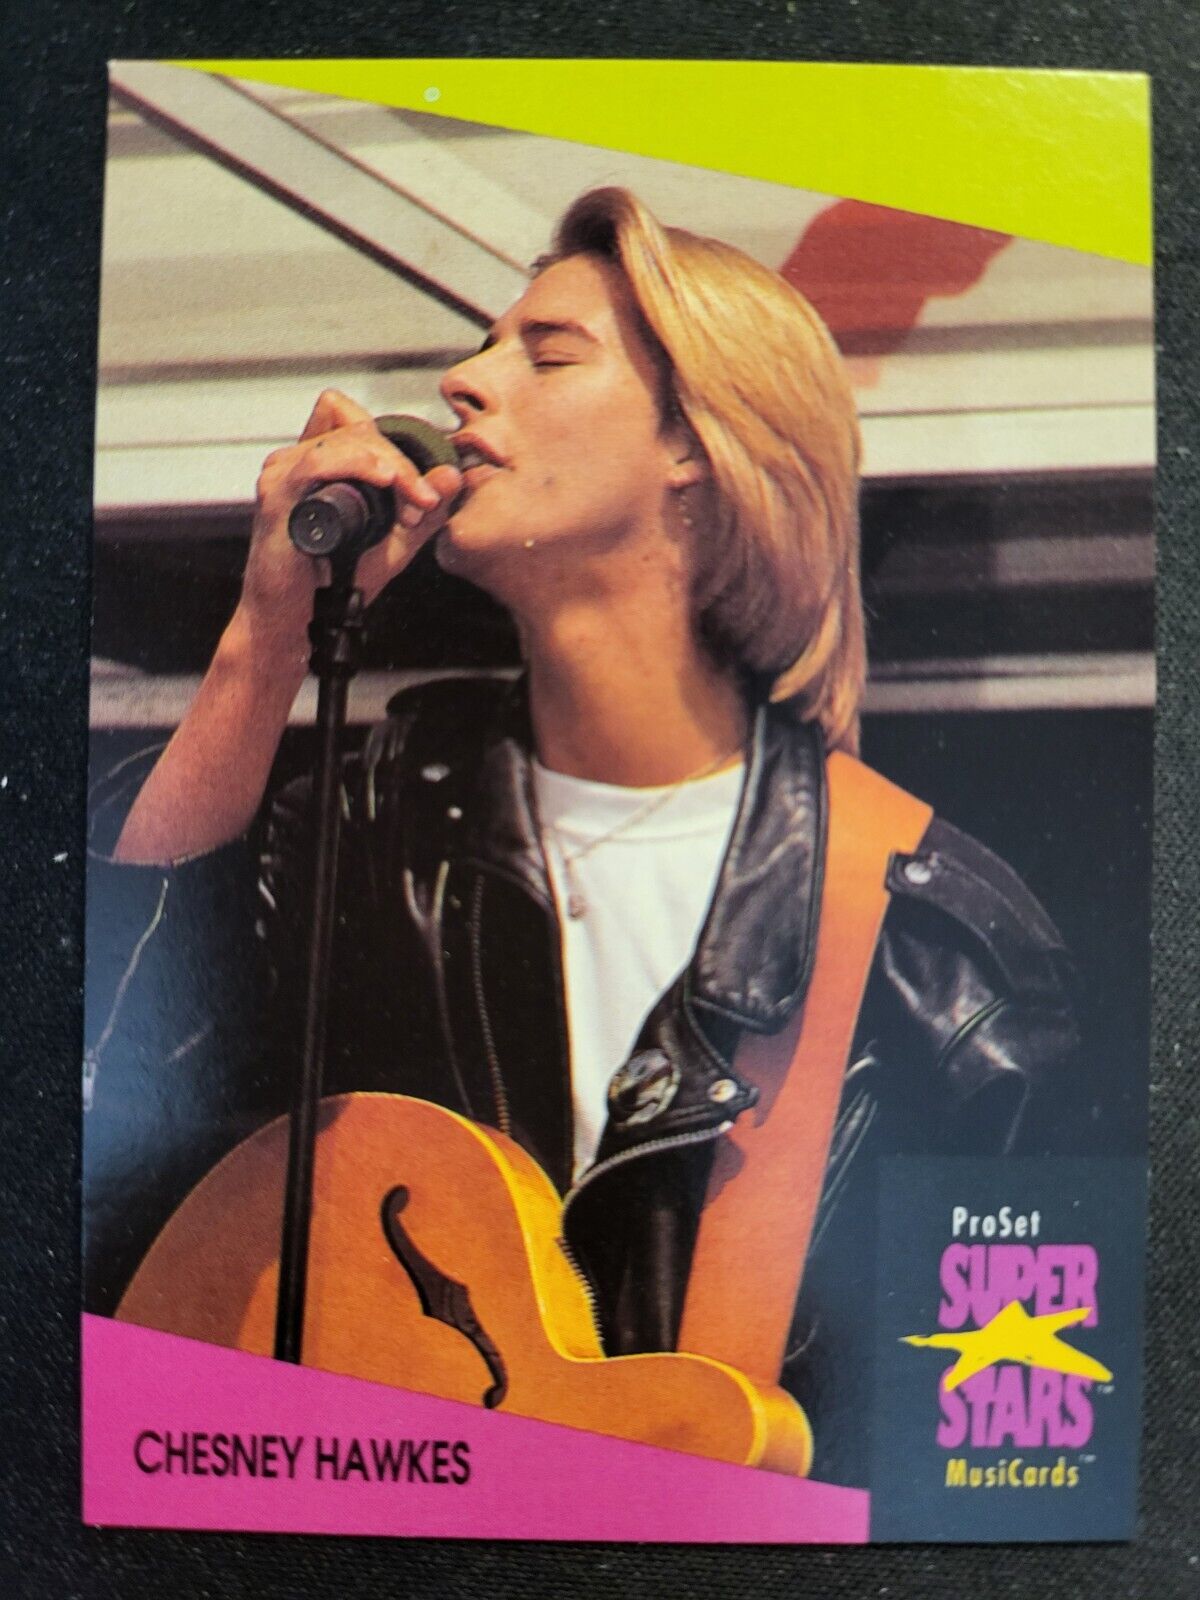 1991 Pro Set MusiCards UK Chesney Hawkes RC Card #56